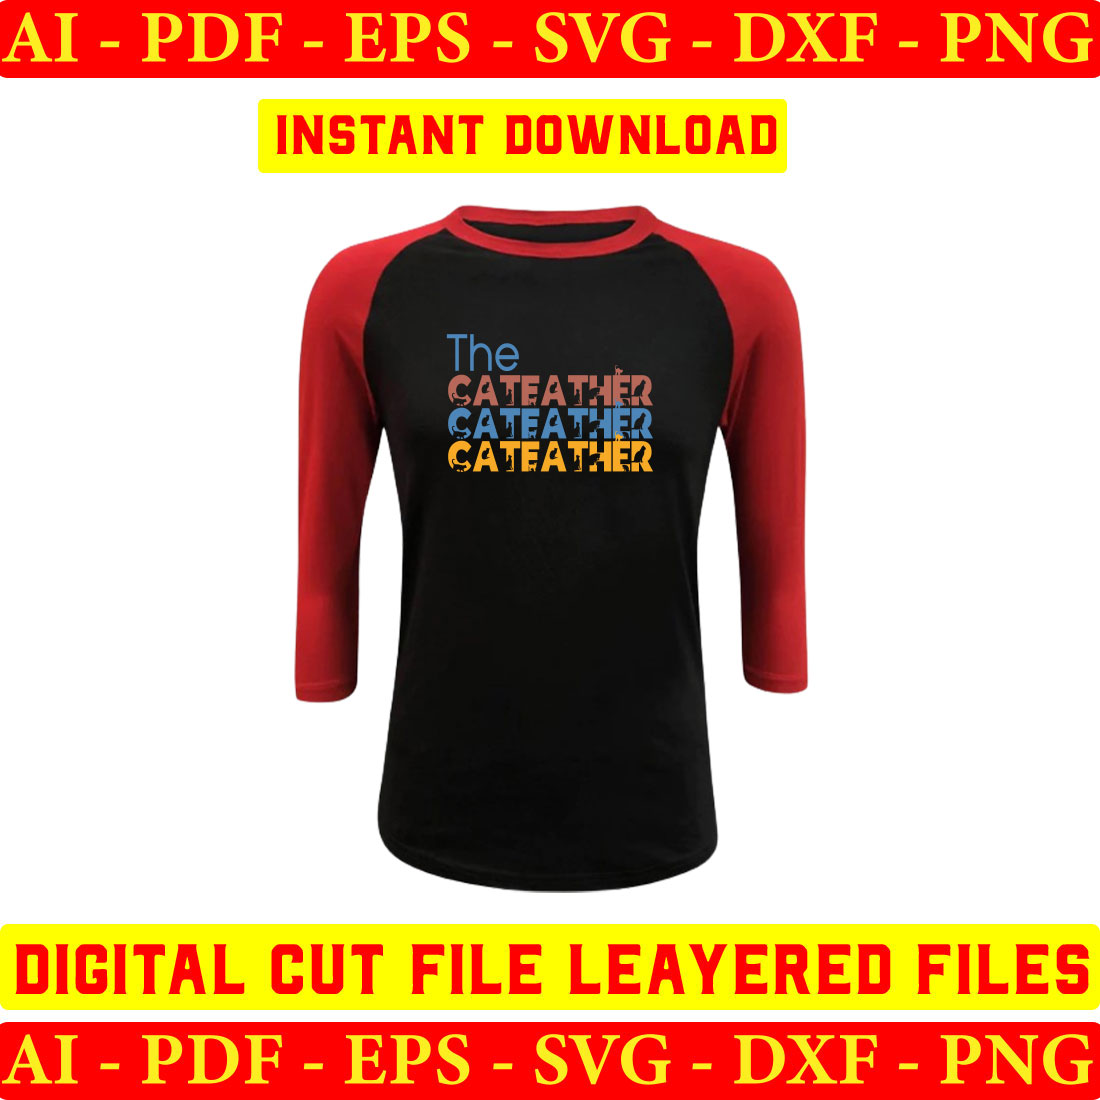 Black and red baseball shirt with the text the father father father father father father.